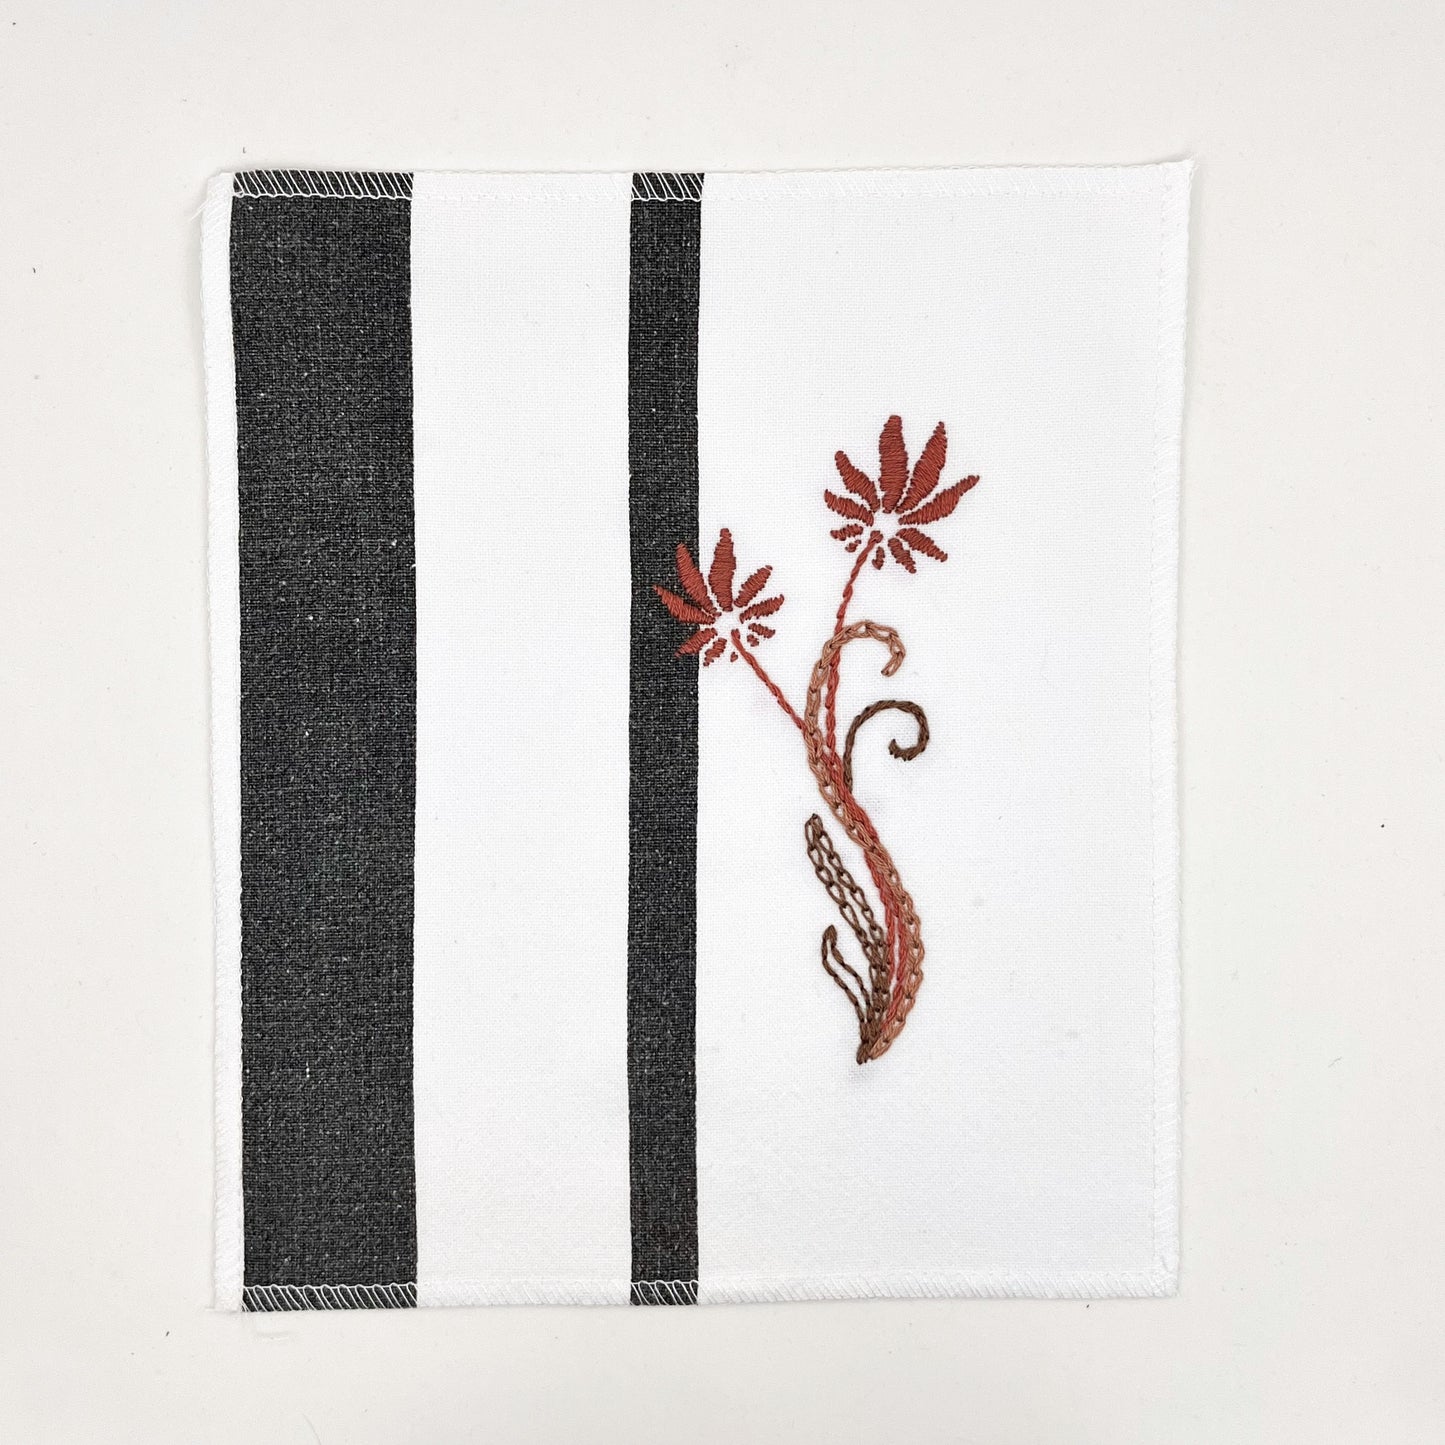 a fabric wall hanging made out of white fabric with black vertical stripes, hand stitched with flowers in shades of mauve with long curvy stems in chainstitch, backstitch and stem stitch, on a white background